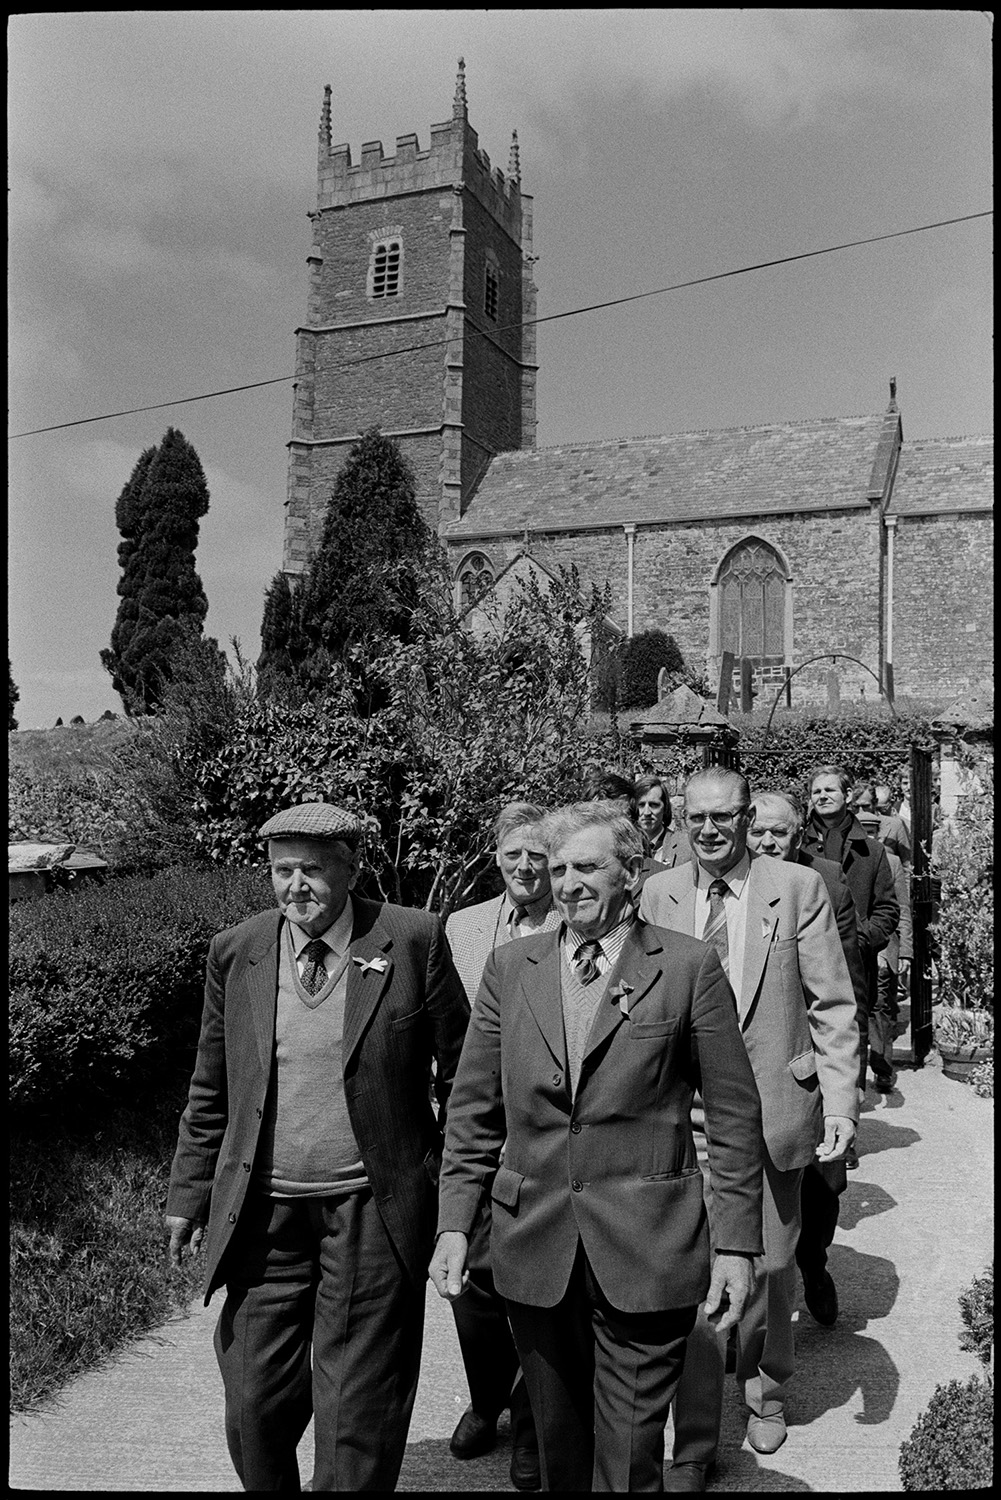 Club Day. Women and club members parading down to village hall with mashed potatoes.
[Men parading down the church path in the Iddesleigh Club Day procession. Iddesleigh Church can be seen in the background.]